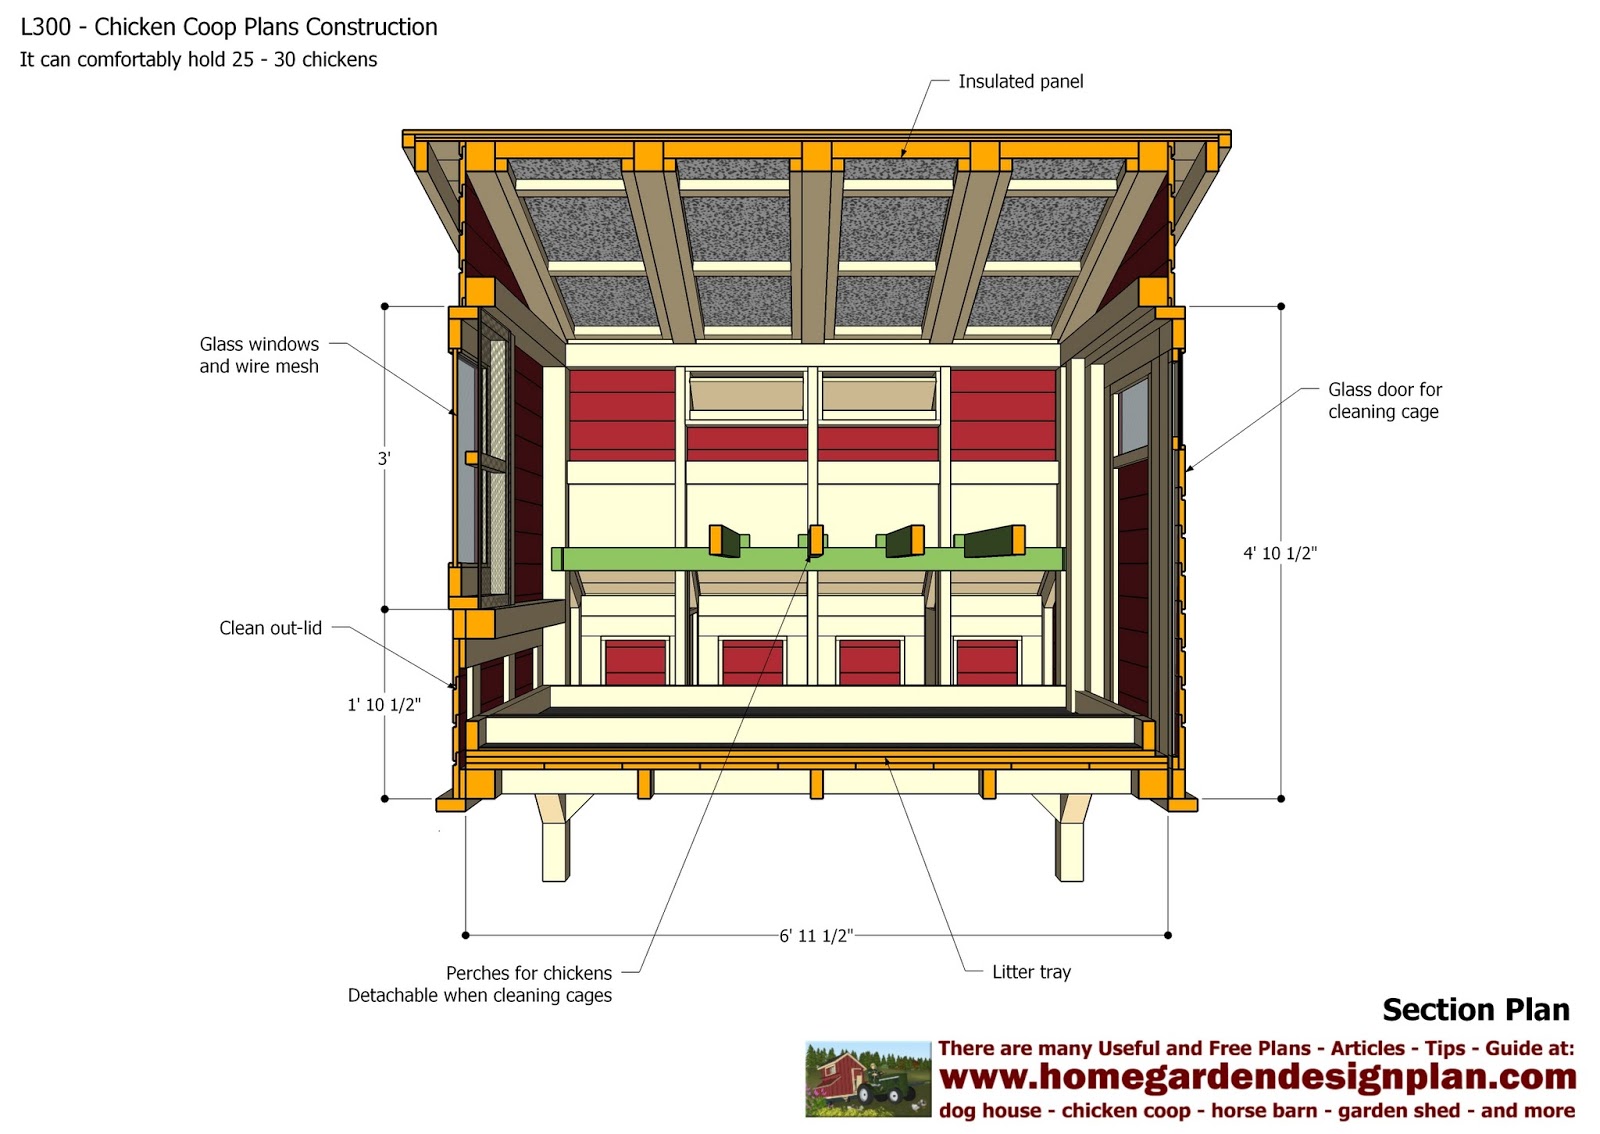 Ck Coop: Guide Plans for a frame chicken coop